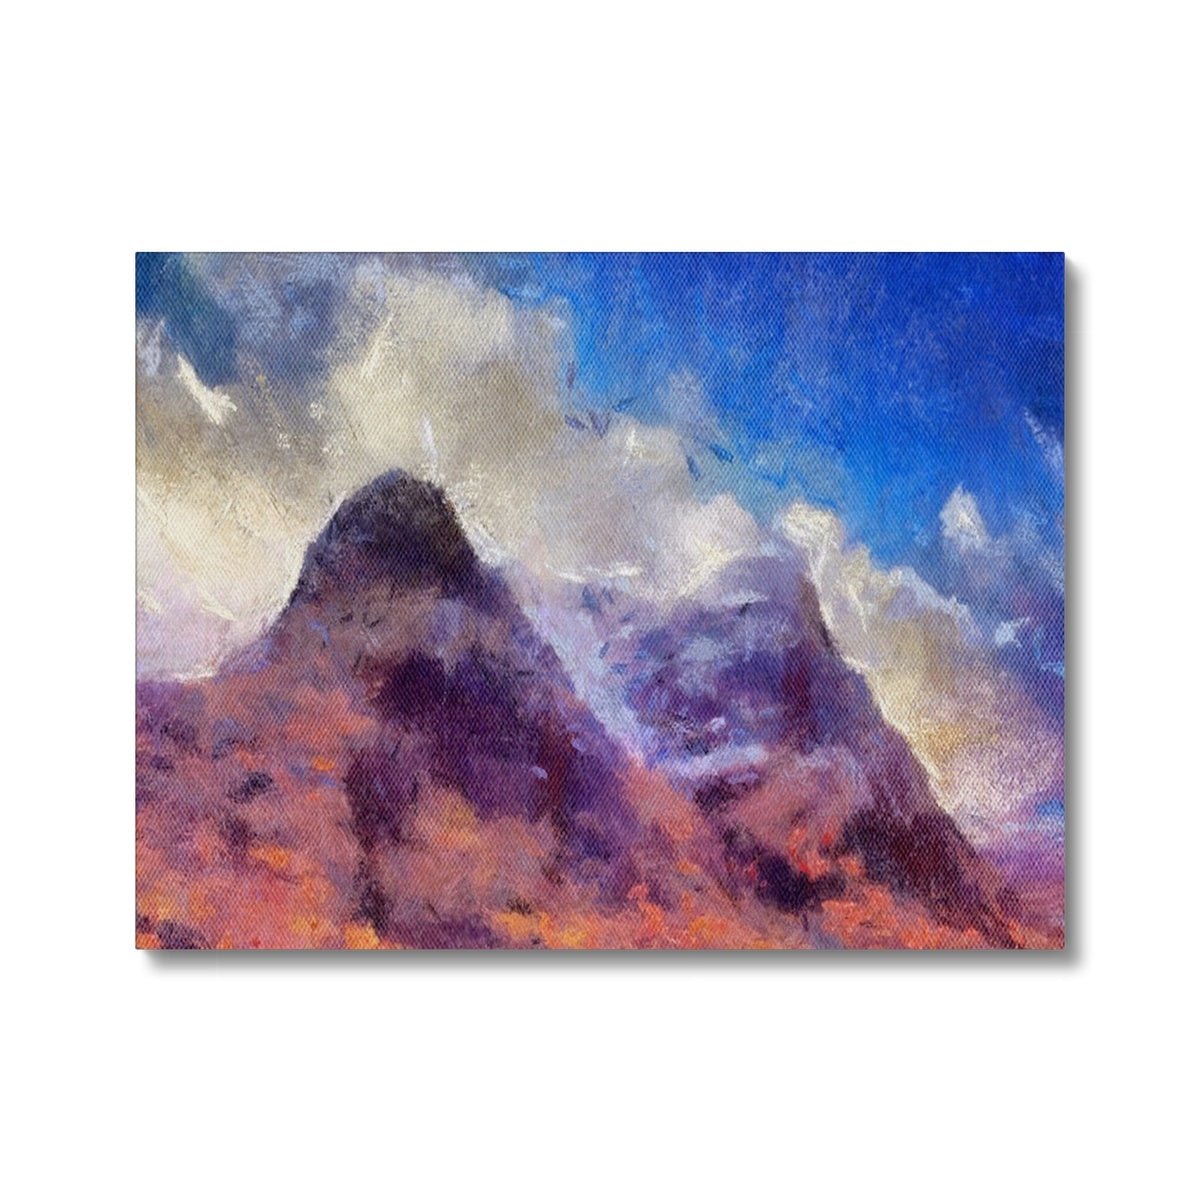 Glencoe Painting | Canvas From Scotland-Contemporary Stretched Canvas Prints-Glencoe Art Gallery-24"x18"-Paintings, Prints, Homeware, Art Gifts From Scotland By Scottish Artist Kevin Hunter